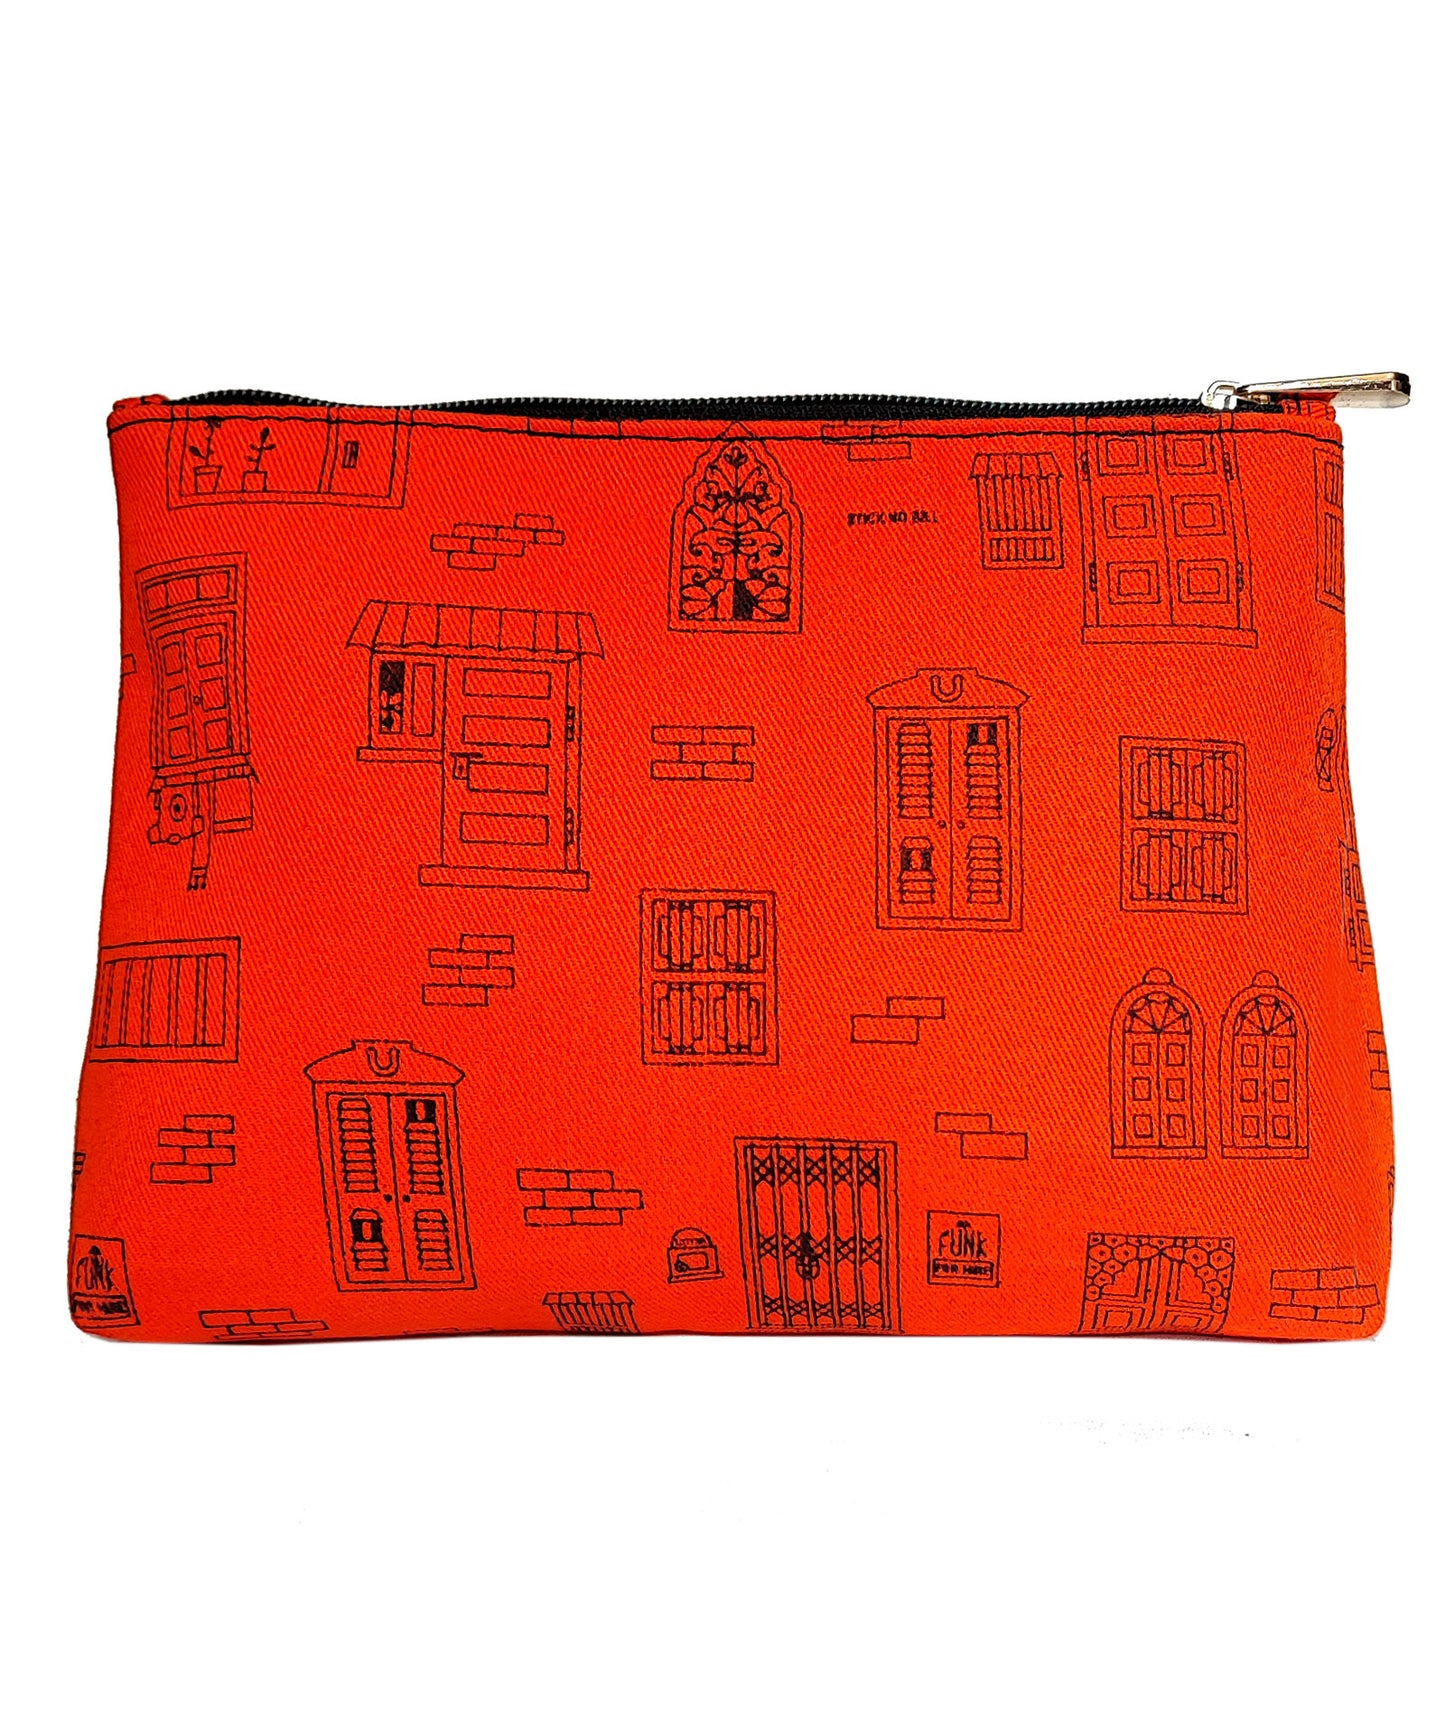 Wall Printed Canvas Travel Pouch Orange